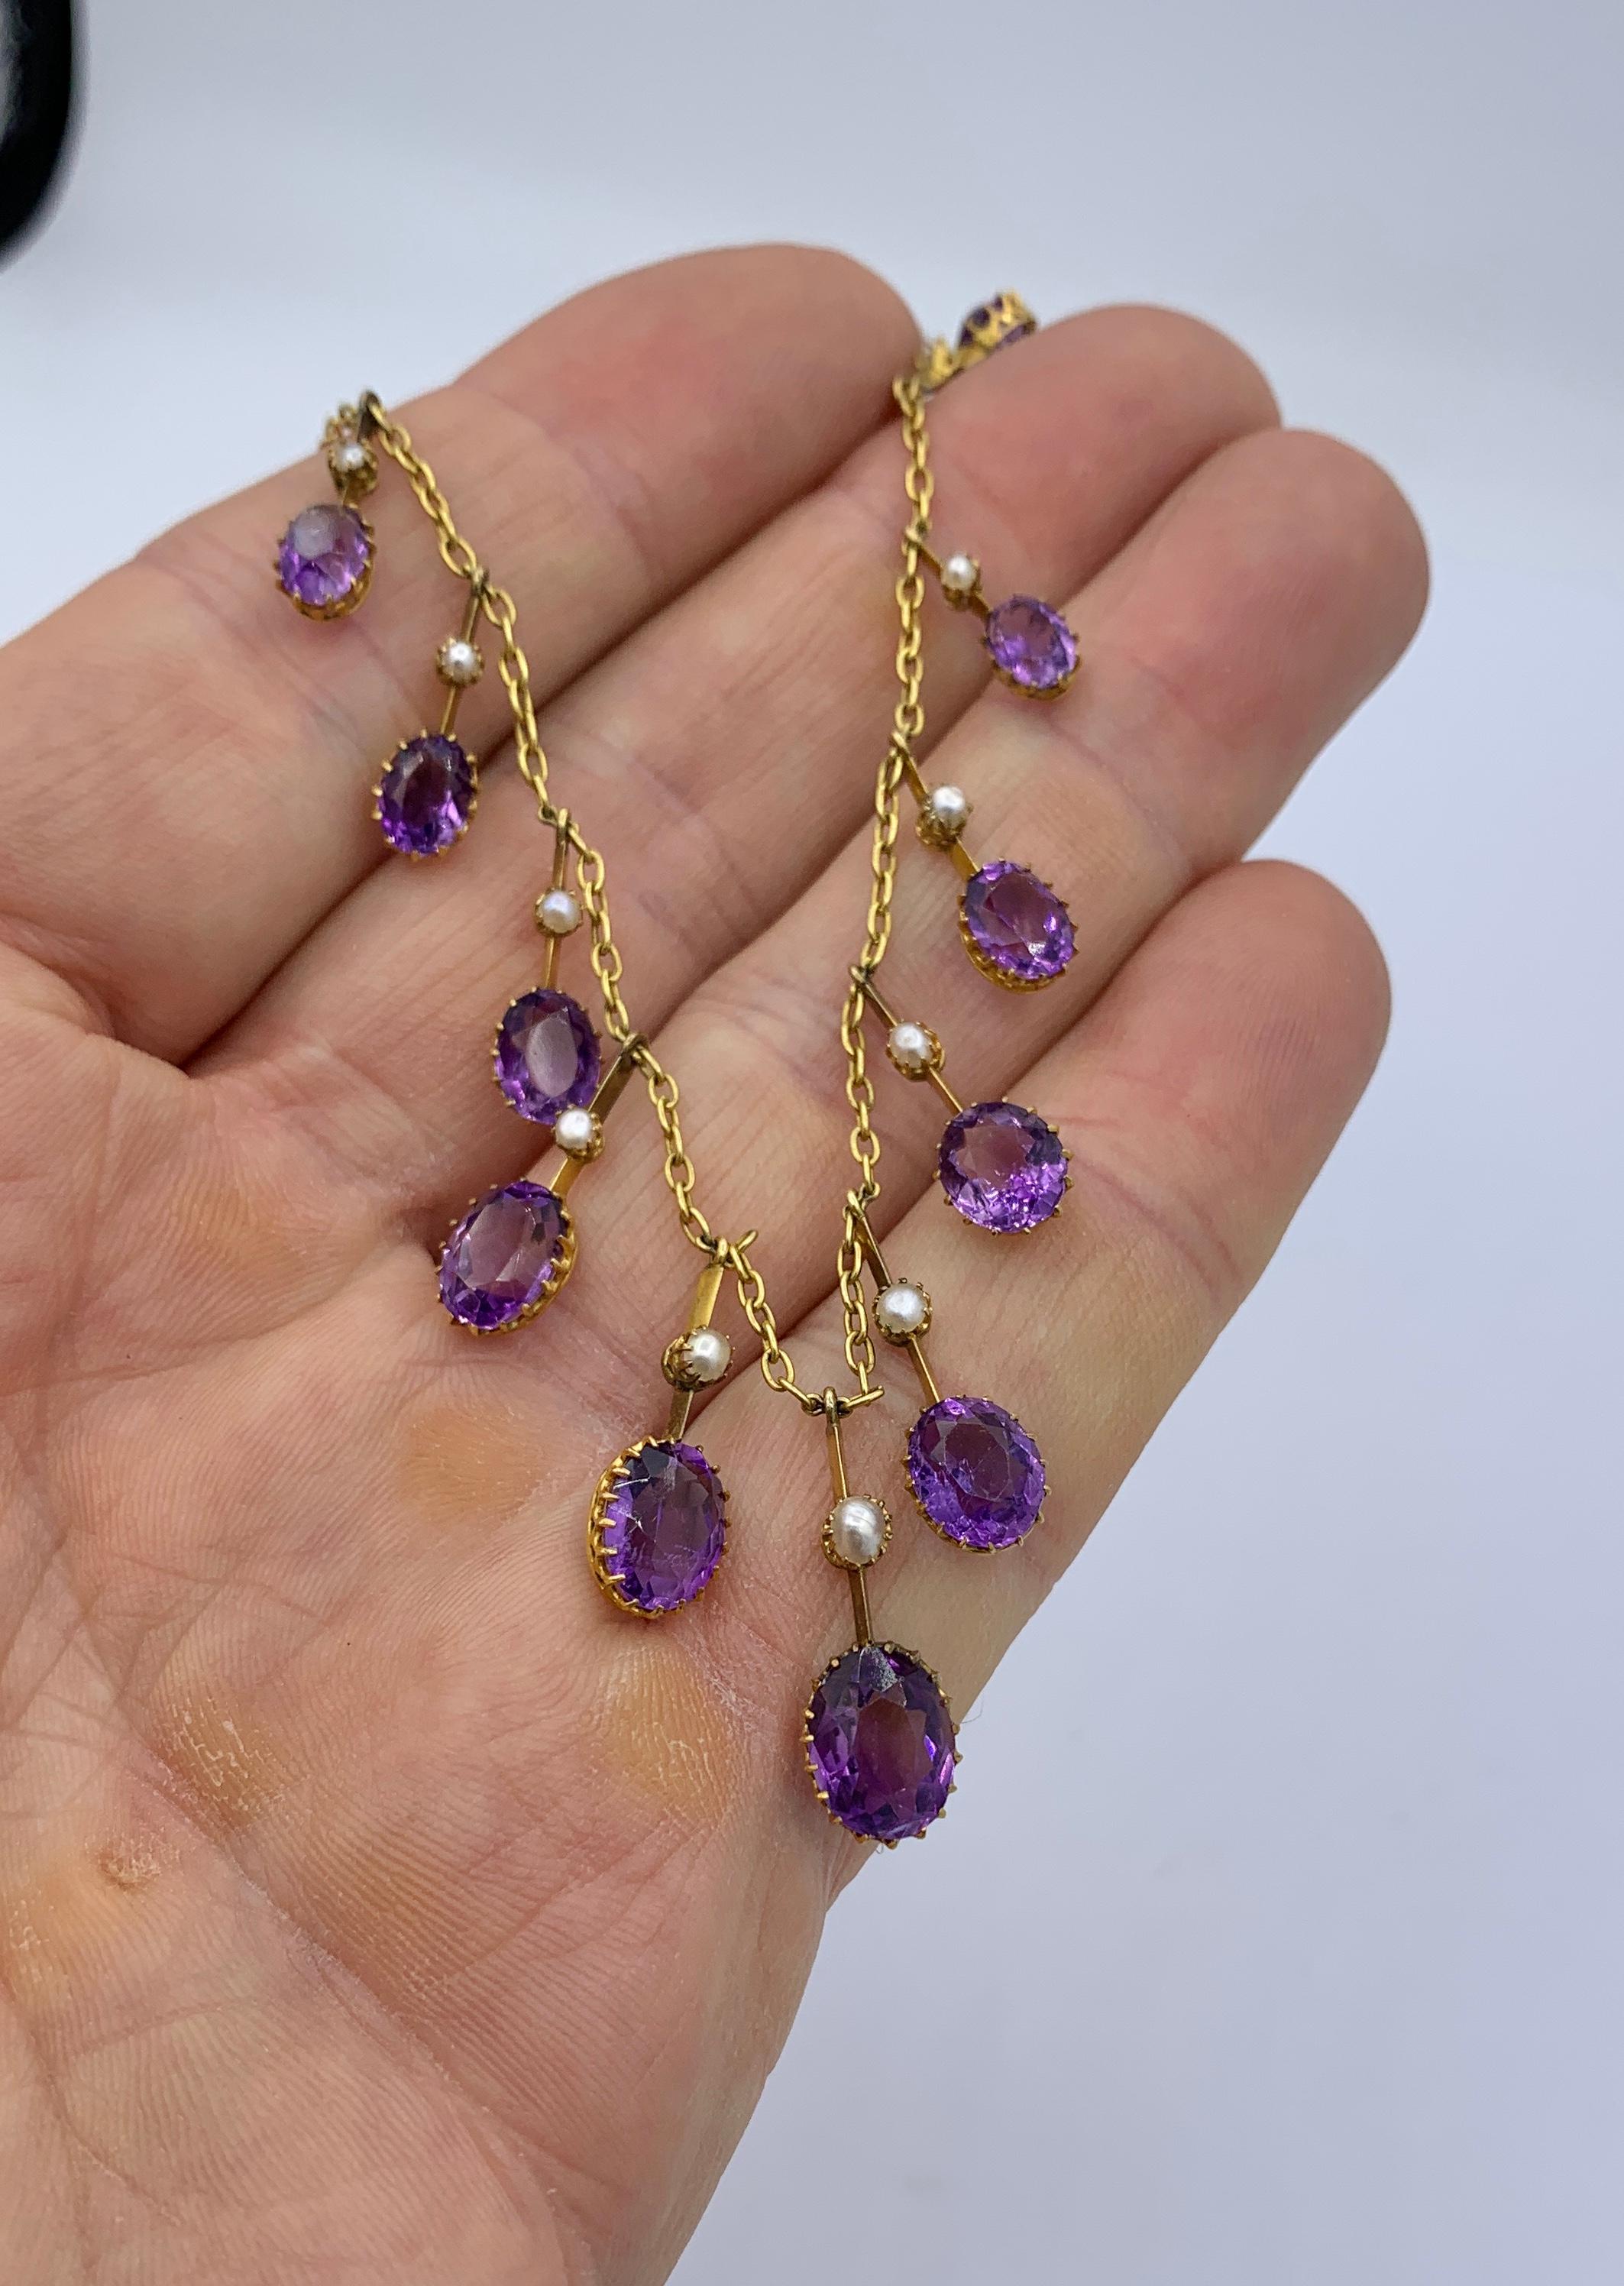 THIS IS A STUNNING ANTIQUE VICTORIAN - BELLE EPOQUE NECKLACE WITH THE MOST GORGEOUS NATURAL GRADUATED OVAL FACETED SIBERIAN AMETHYST GEMS SET IN A WONDERFUL PENDANT FRINGE DESIGN WITH KNIFE EDGE DROPS SET WITH PEARLS IN 9 KARAT GOLD.
This antique